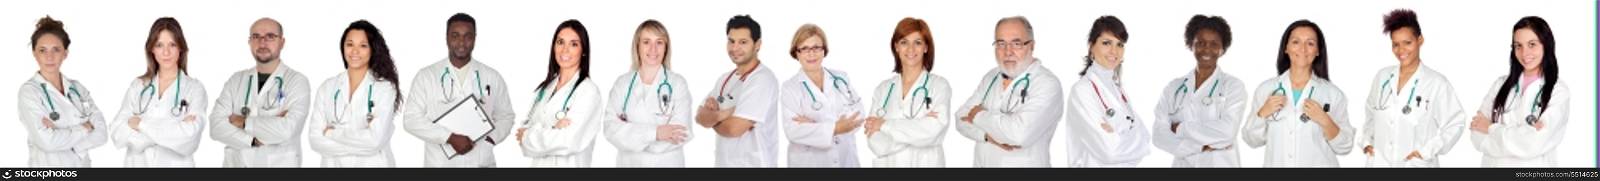 Medical team with white uniform on a over white background